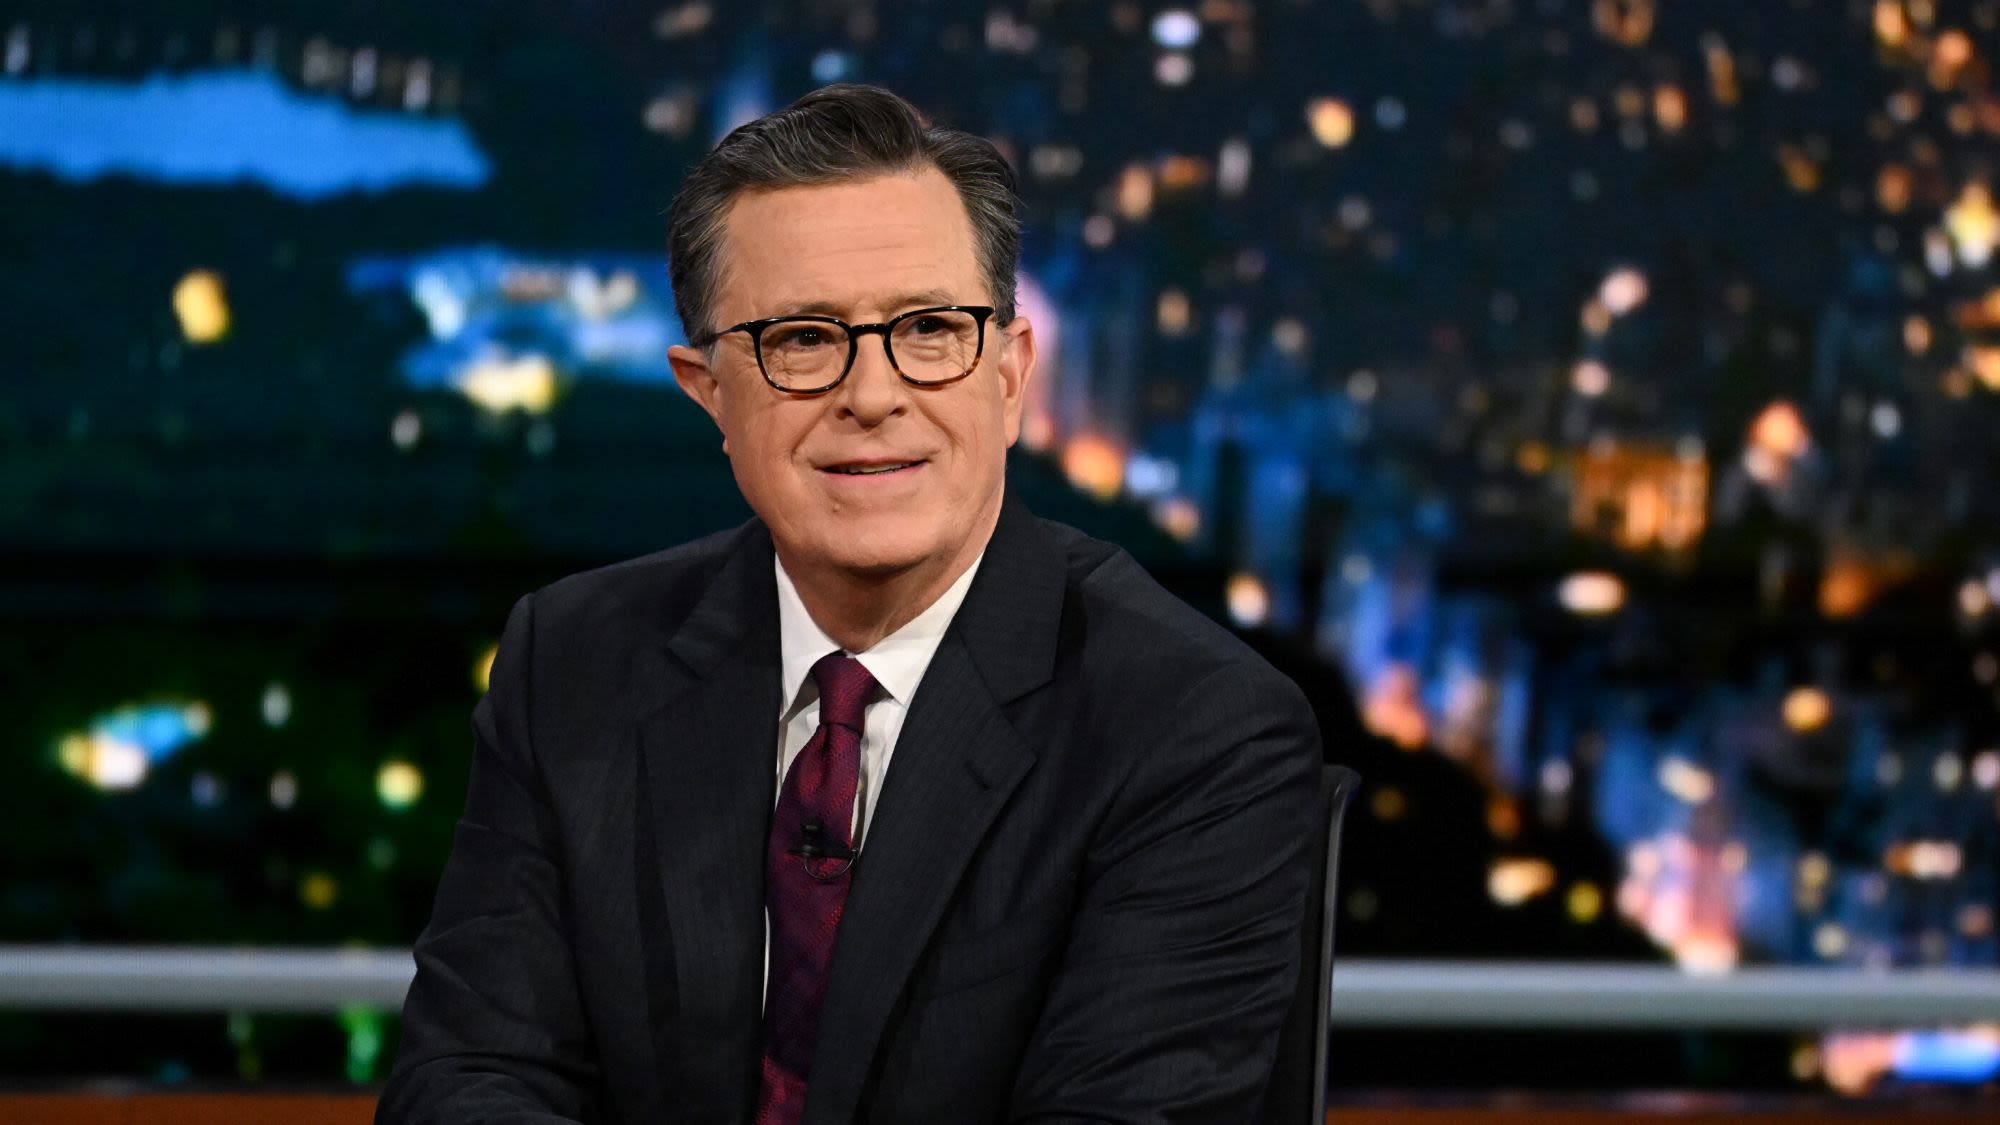 Why is The Late Show with Stephen Colbert not new this week June 24-28?